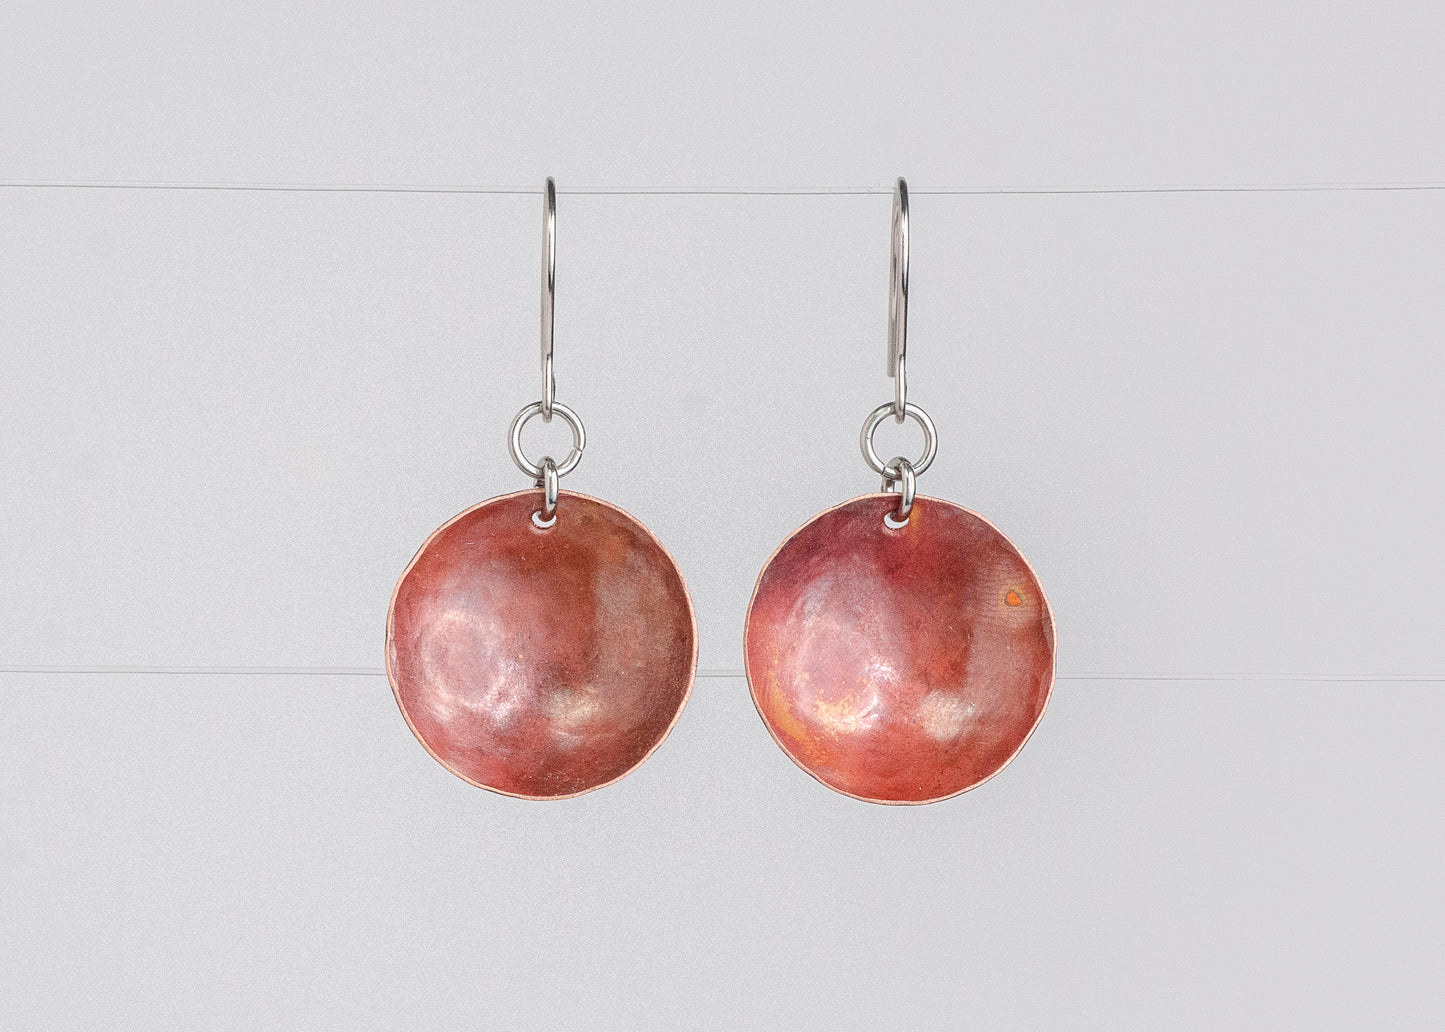 Parabola Earrings Patinated Copper